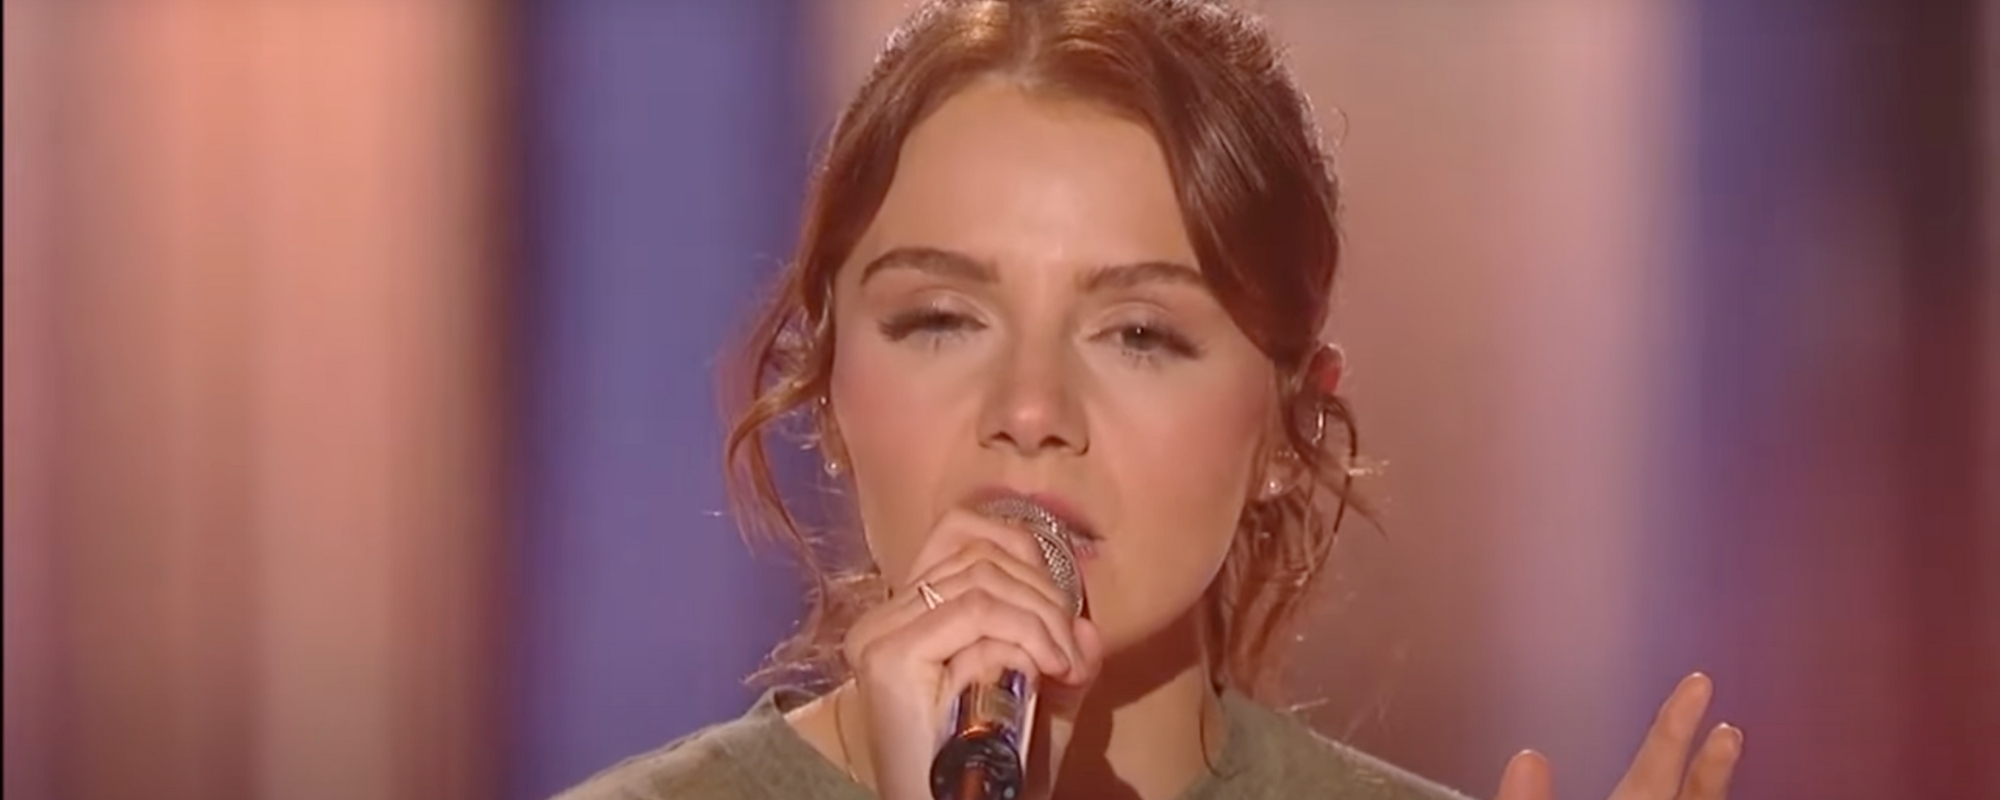 Emmy Russell Reveals the Real Reason Behind Her Barefoot ‘American Idol’ Performance